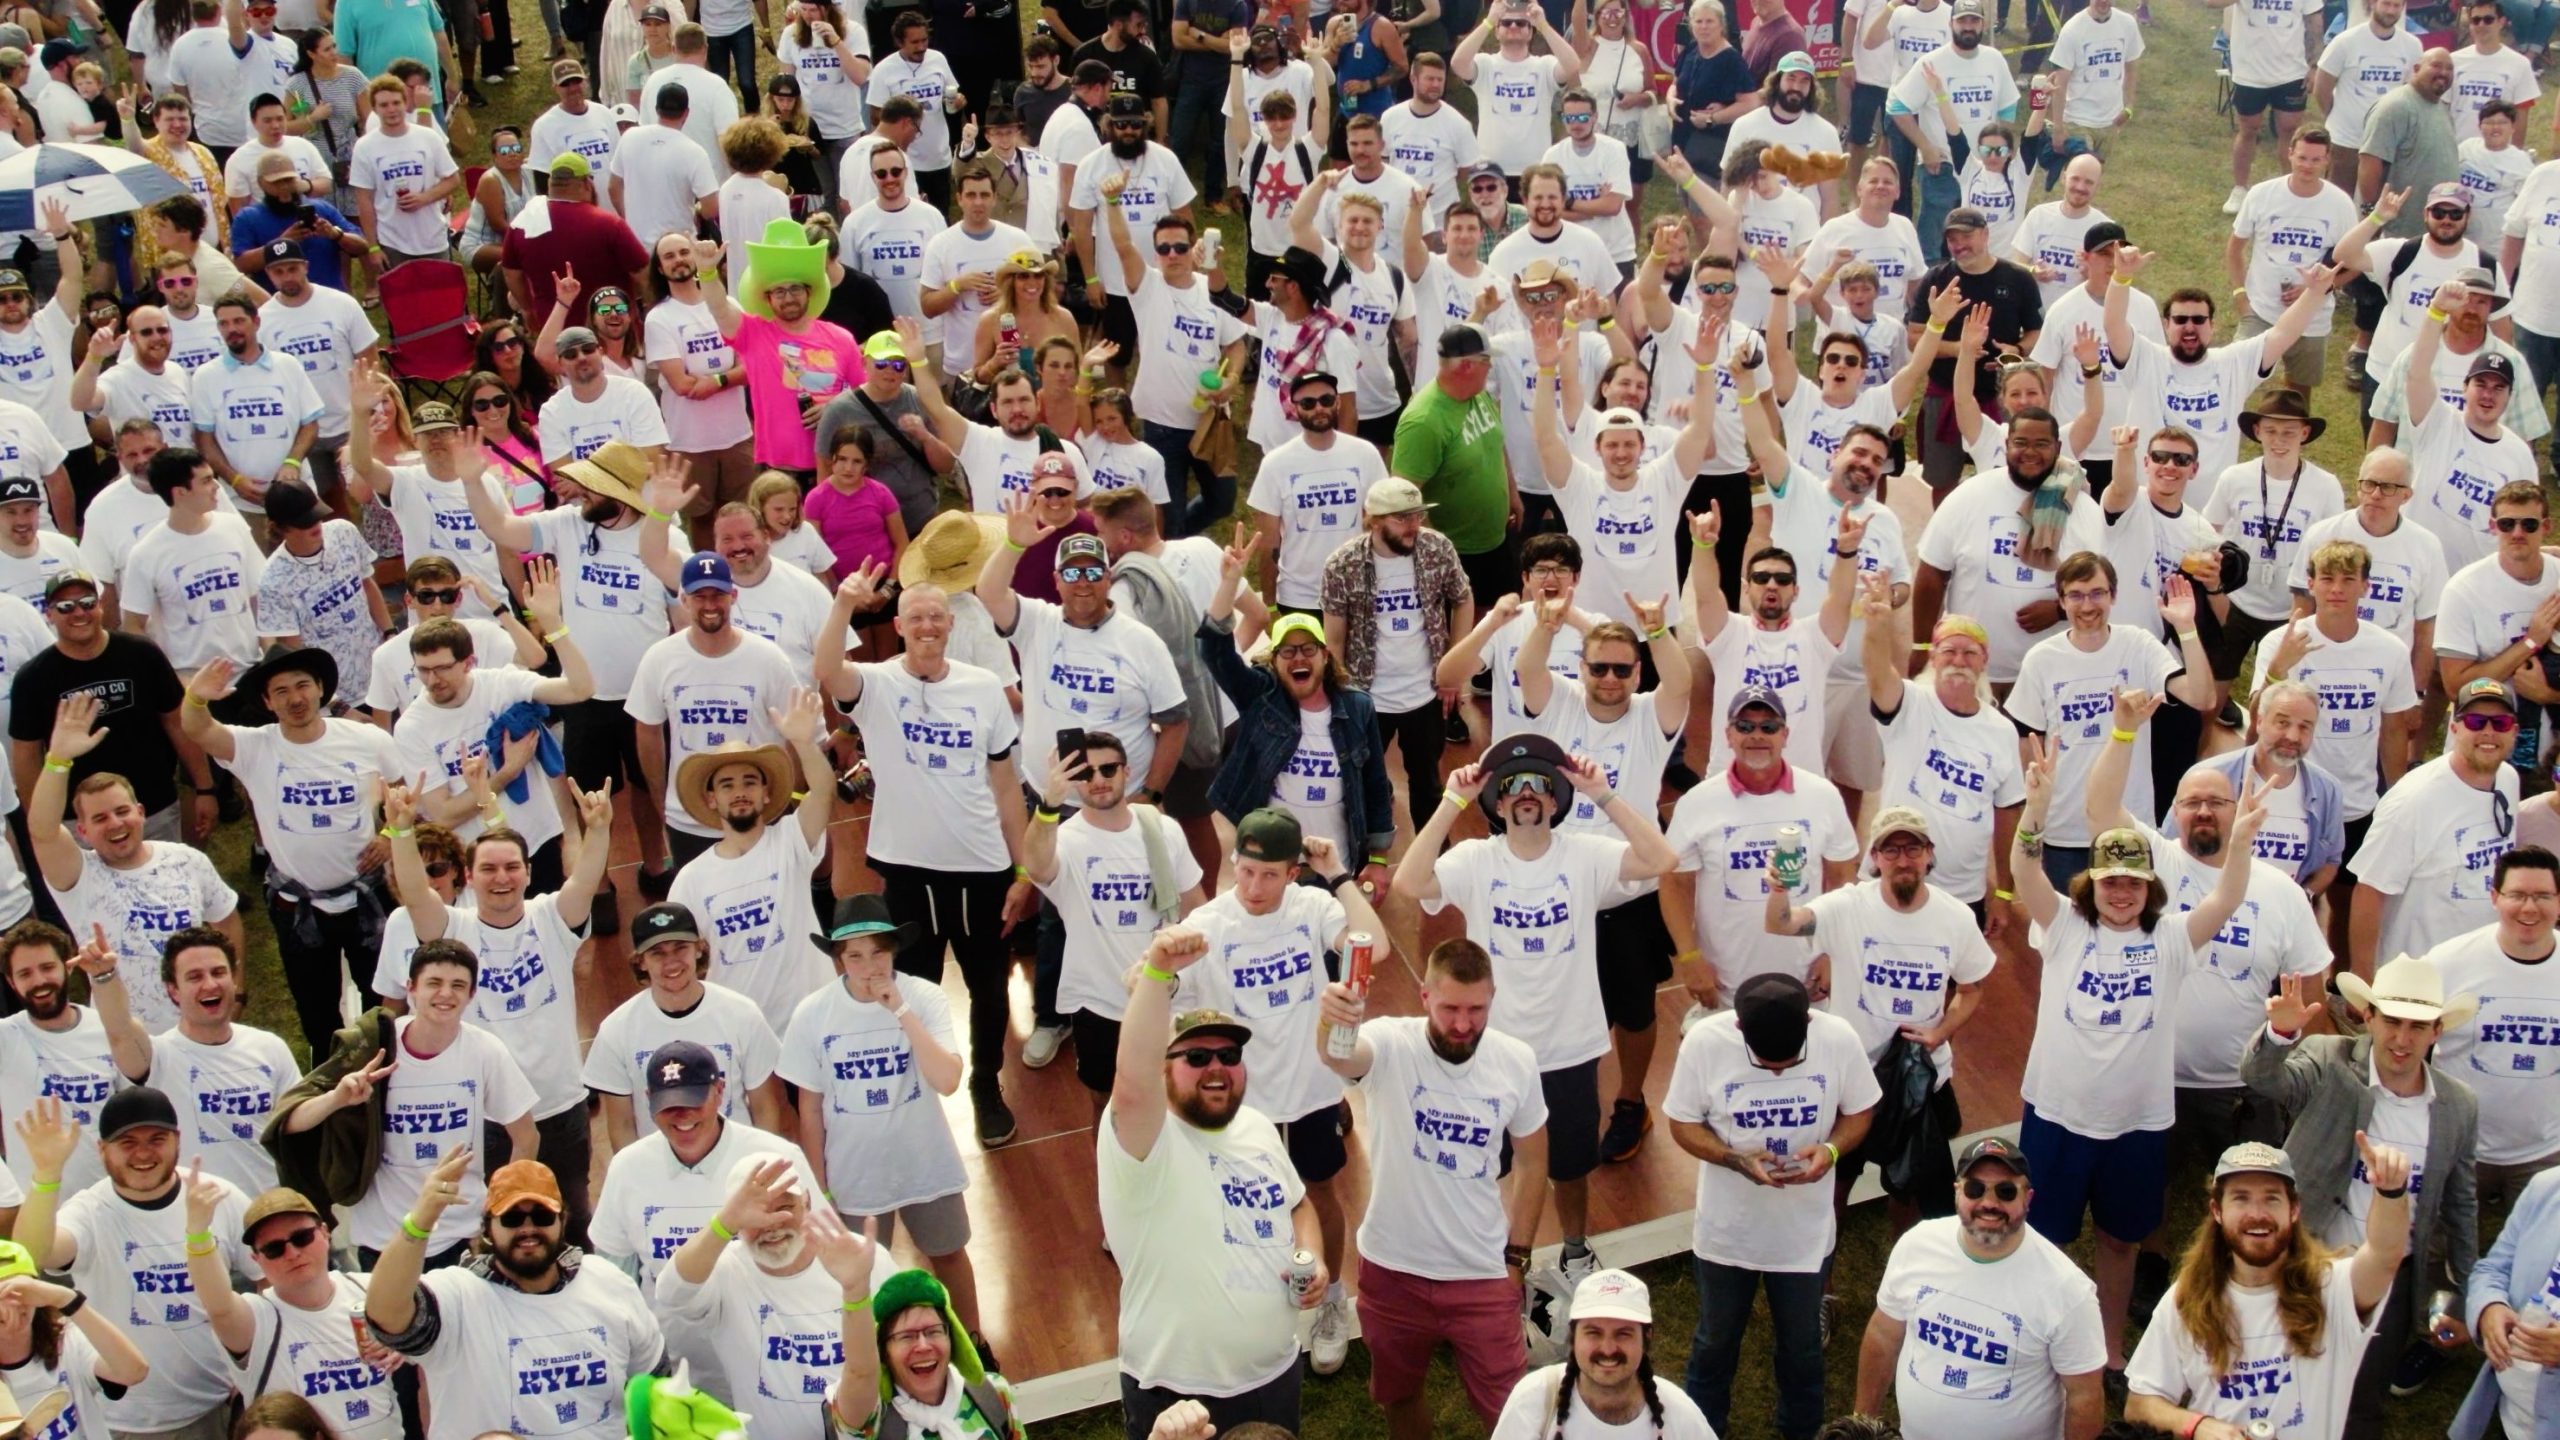 A crowd of men wearing “Kyle” t-shirt representing the city of Kyle, Texas. The city of Kyle attempted to break the record of gathering men with name Kyle. CITY OF KYLE/SWNS TALKER